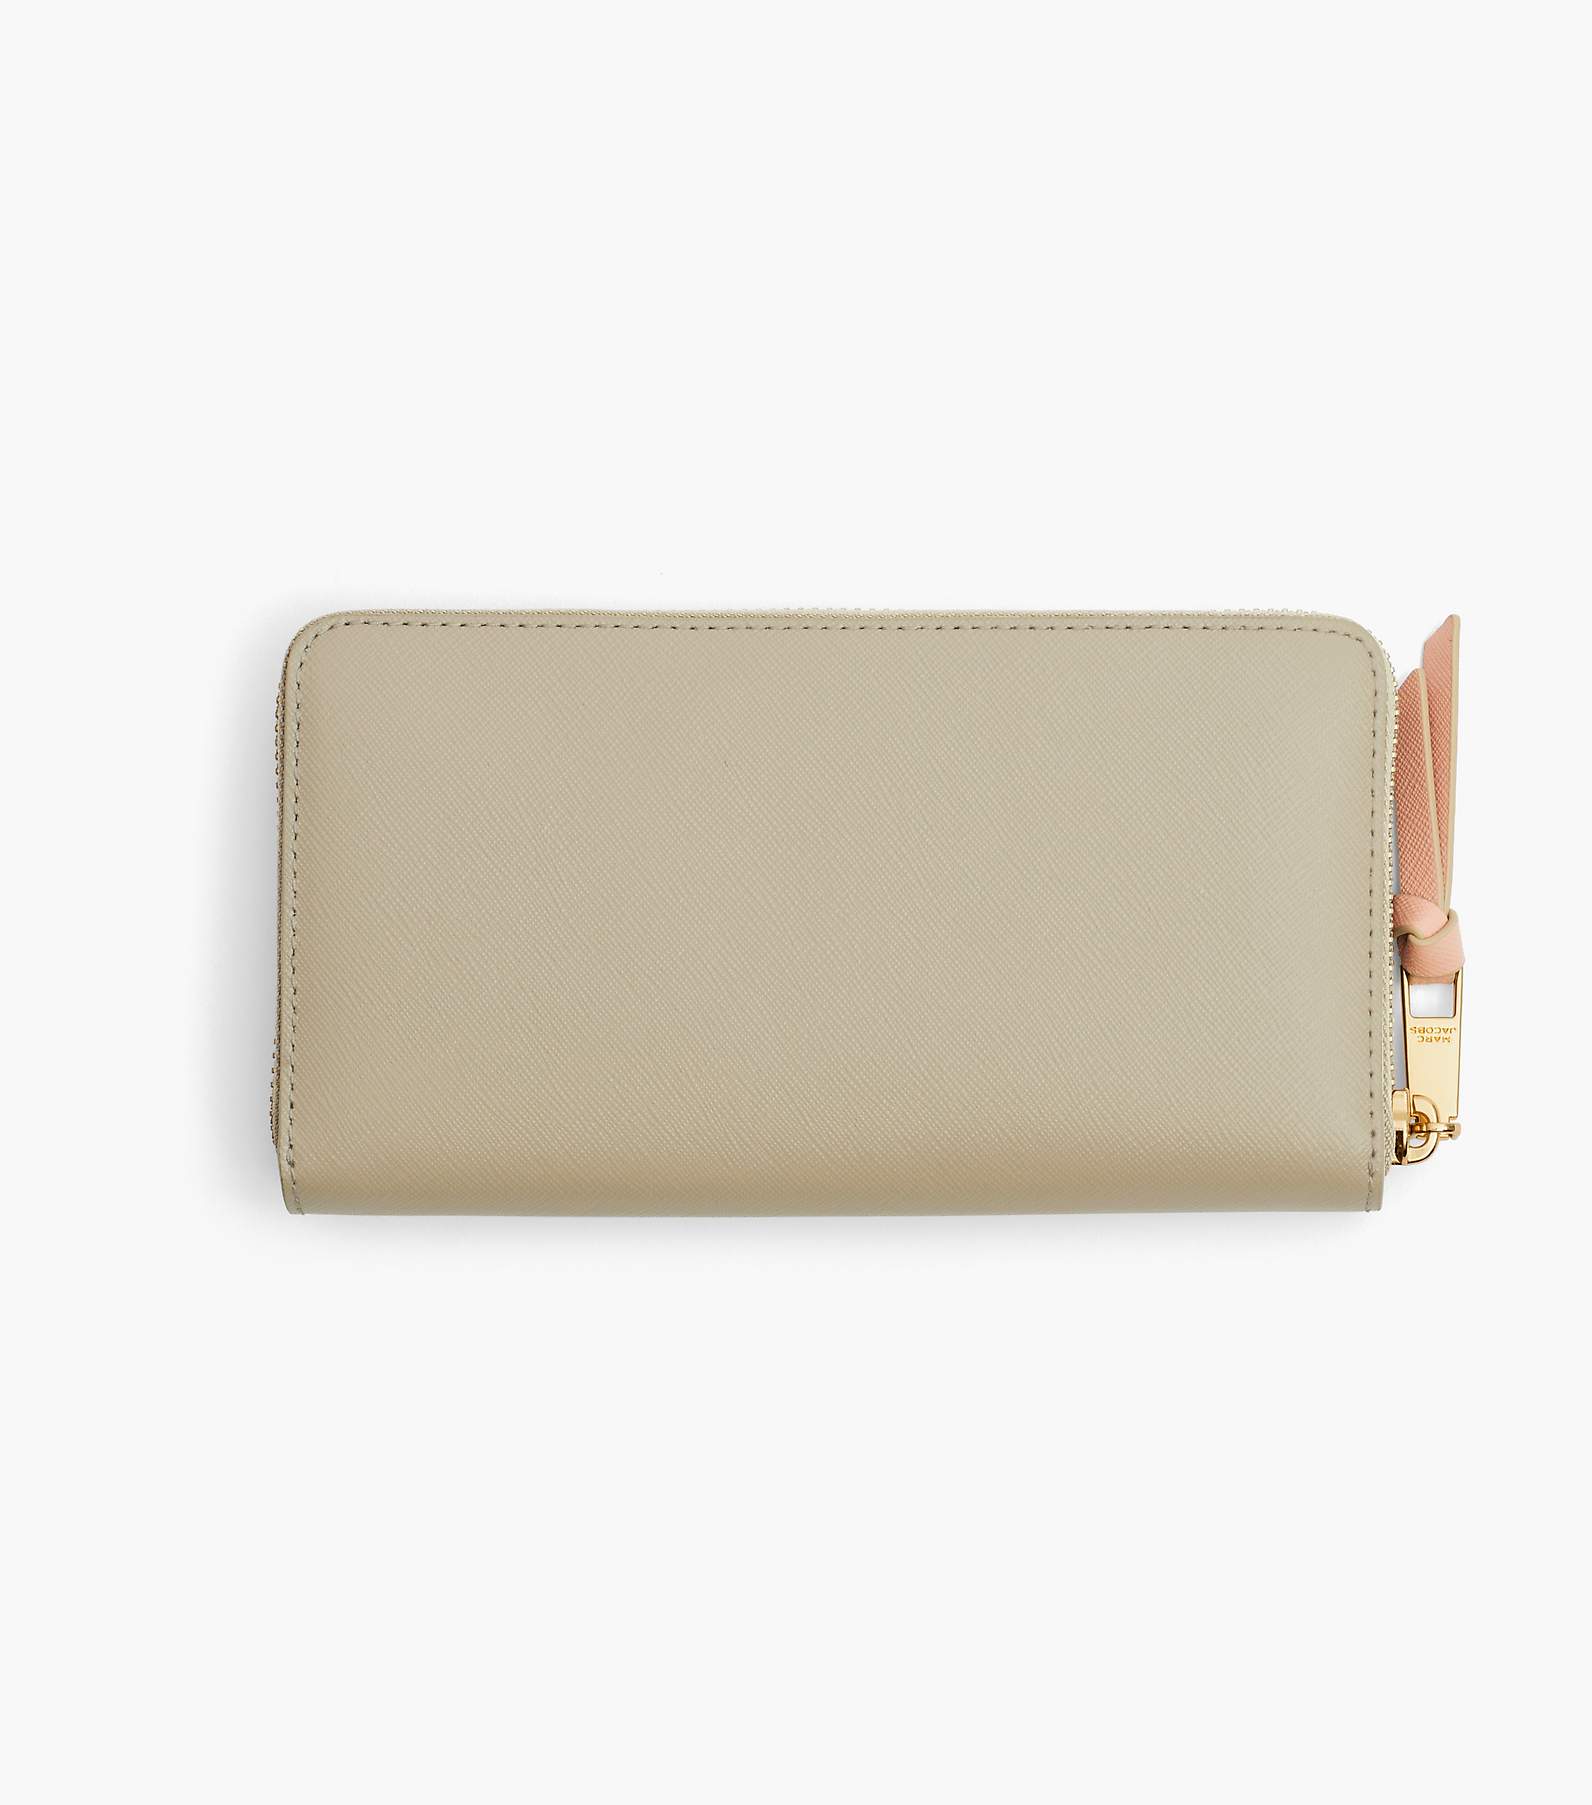 Women's The Utility Snapshot Mini Compact Wallet by Marc Jacobs